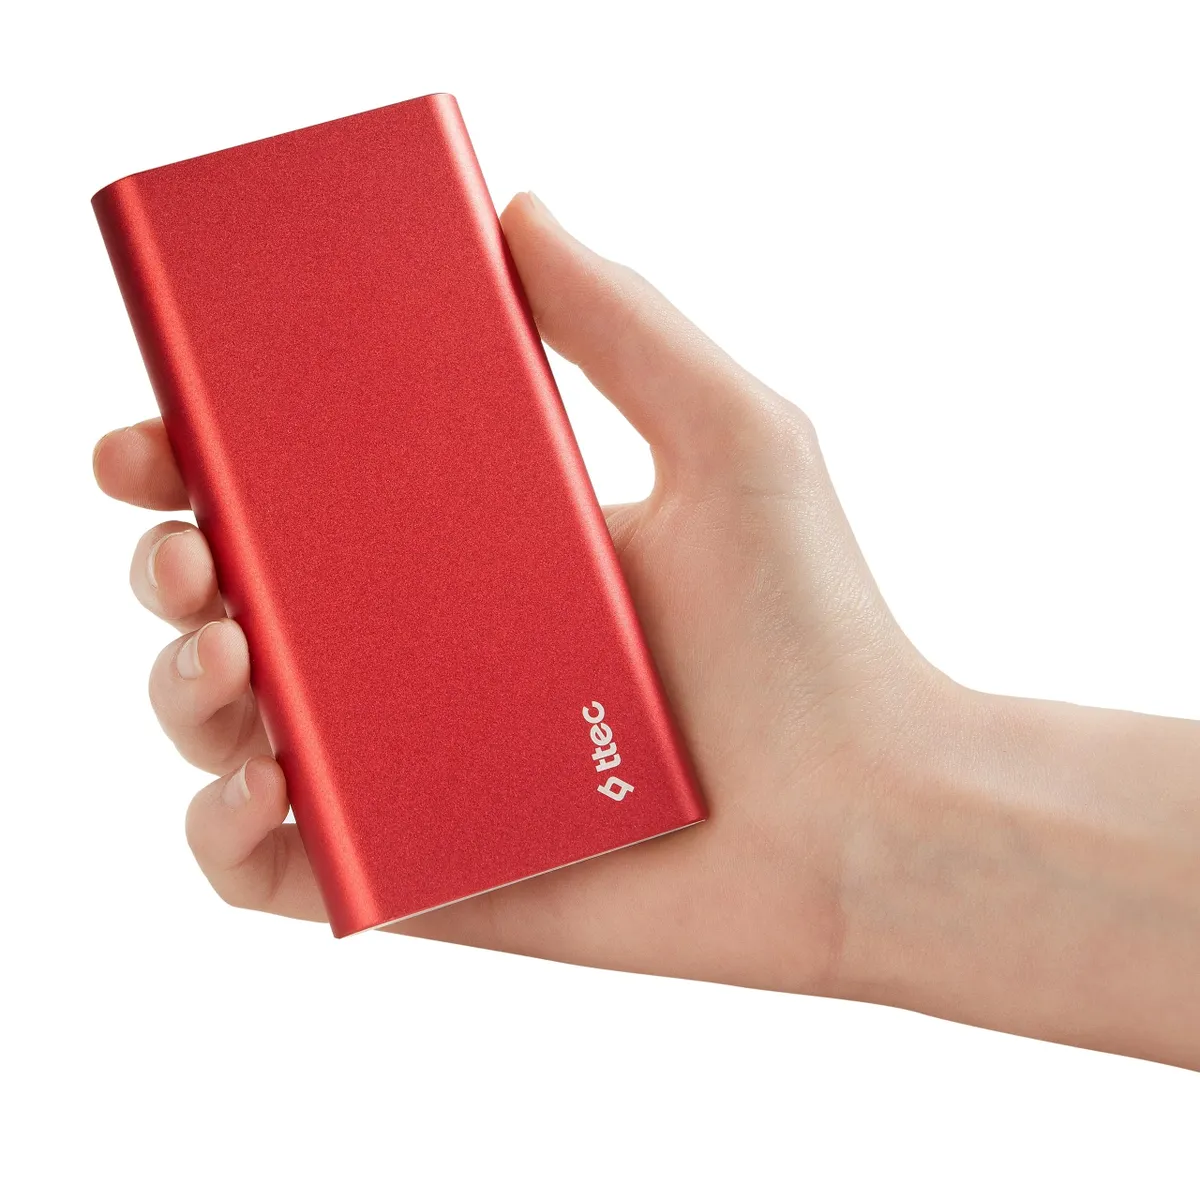 ttec AlumiSlim S Universal Mobile Charger Power Bank 10000 mAh in red, smaller than hand